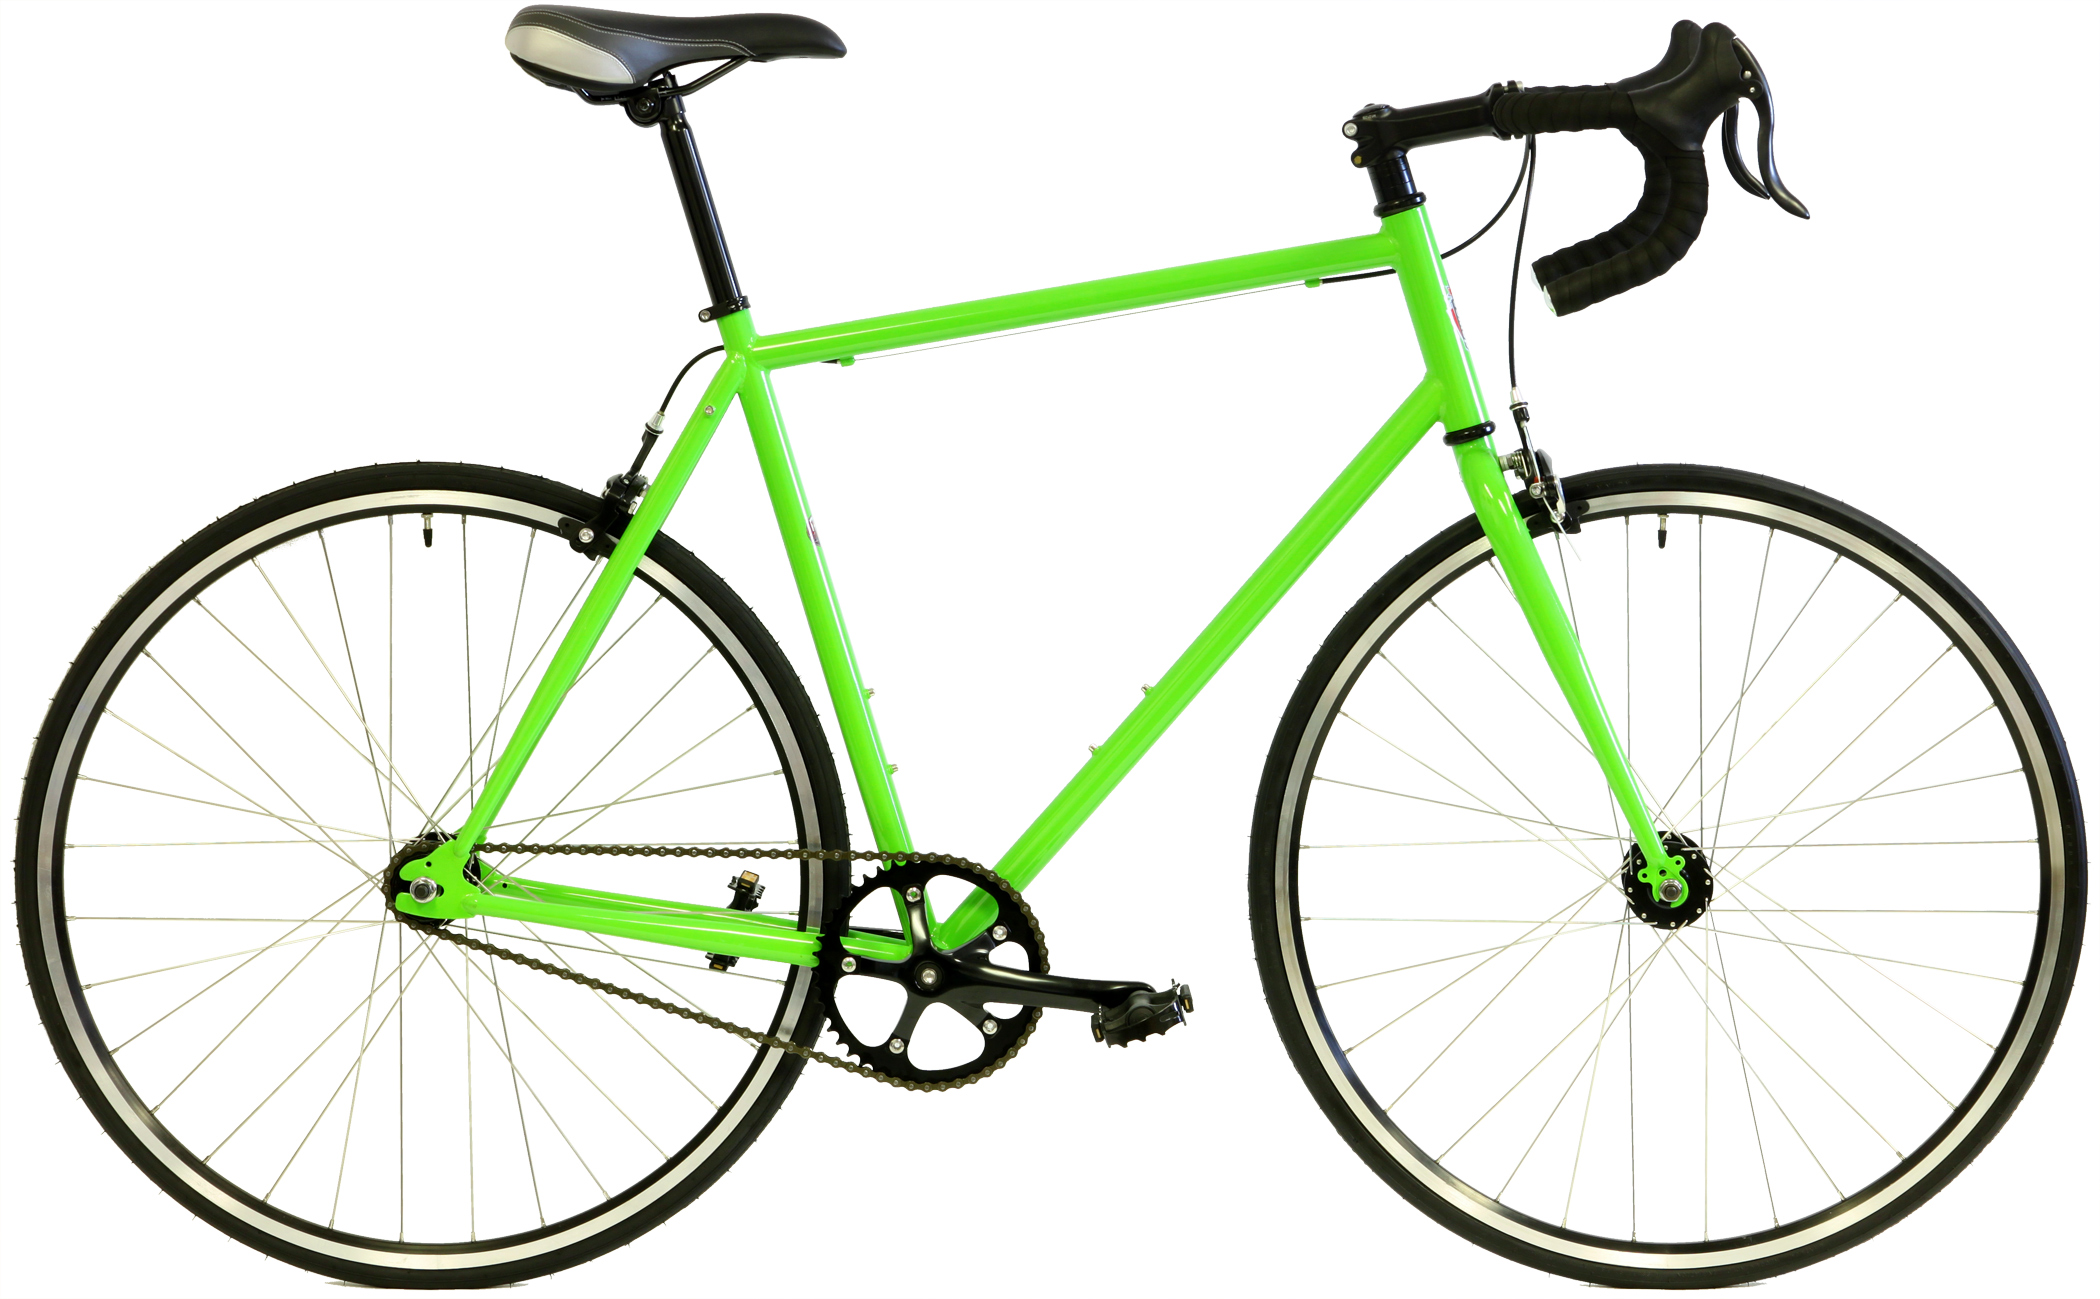 Save Up to 60% Off Fixie Road Bikes | Track Bikes | Fixed ...